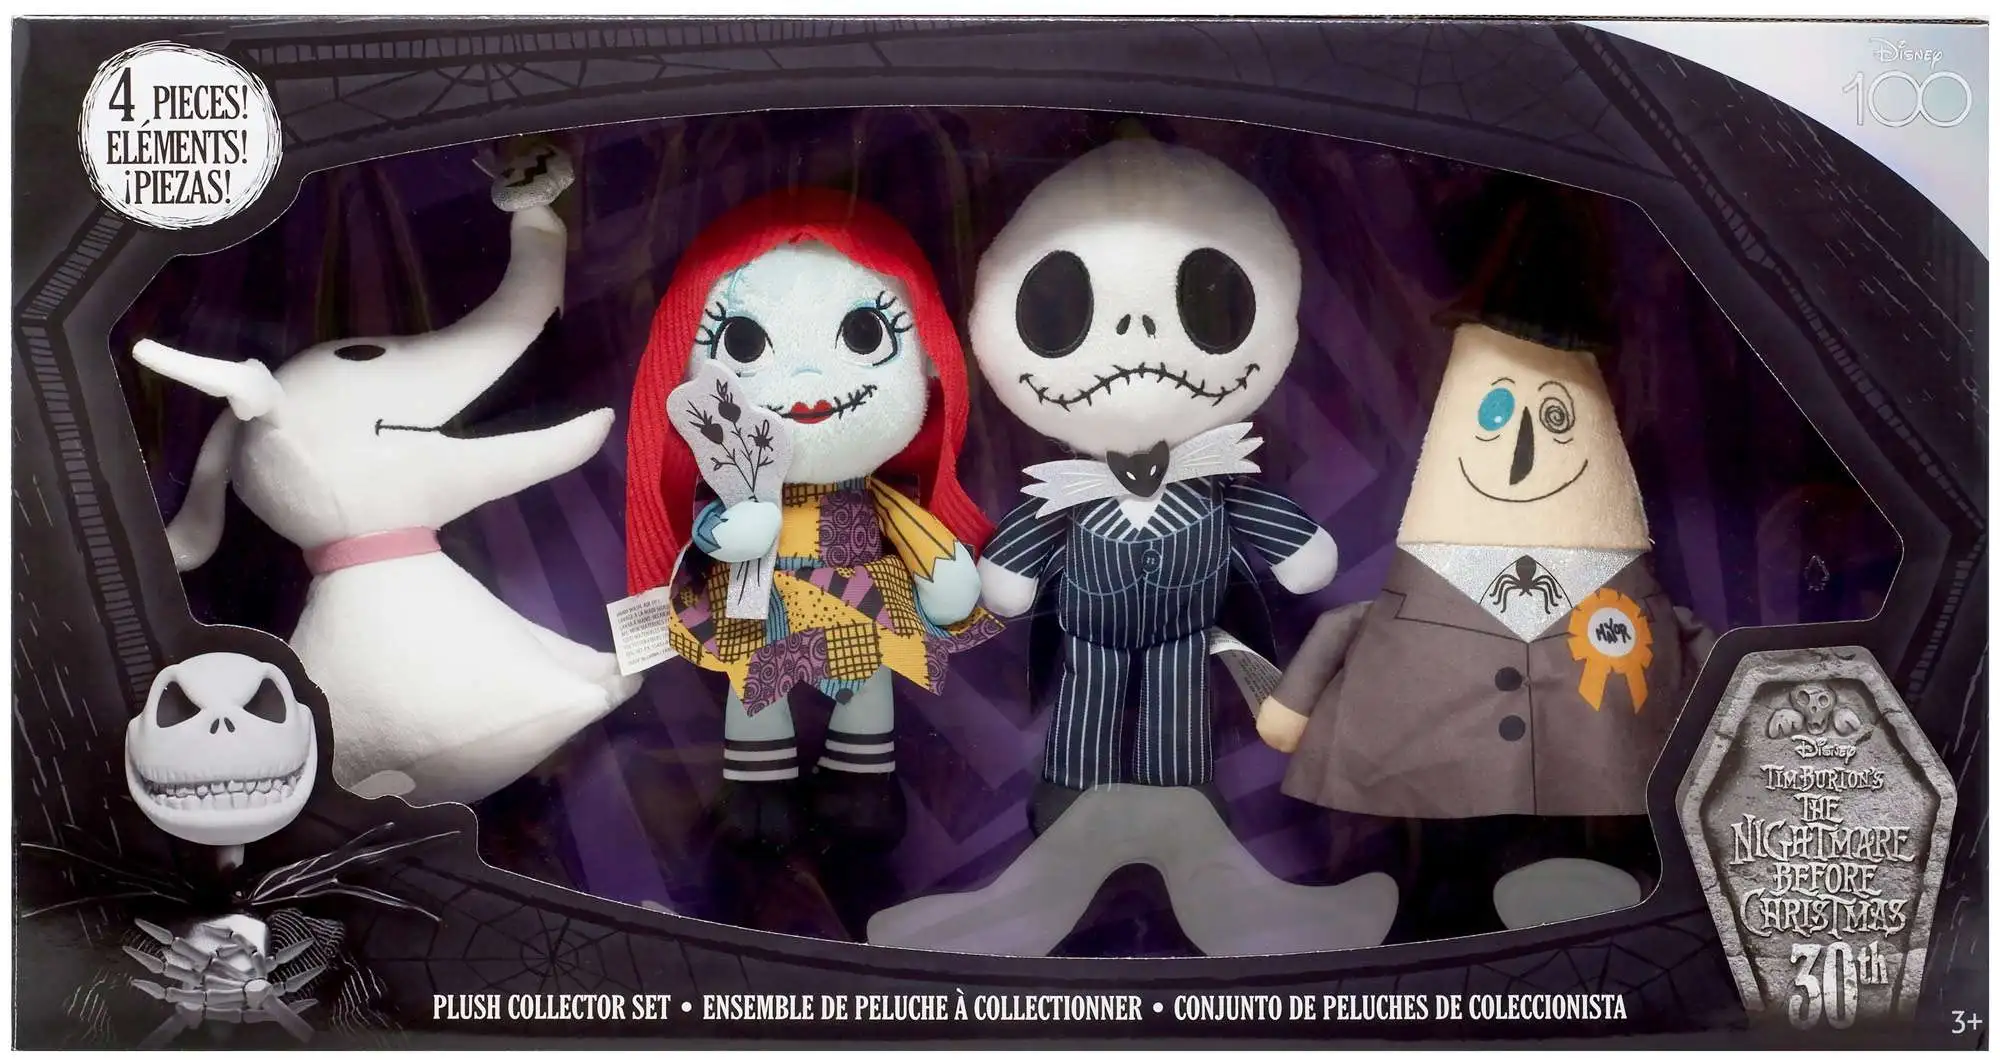 The Nightmare Before Christmas Mash-Up Pack